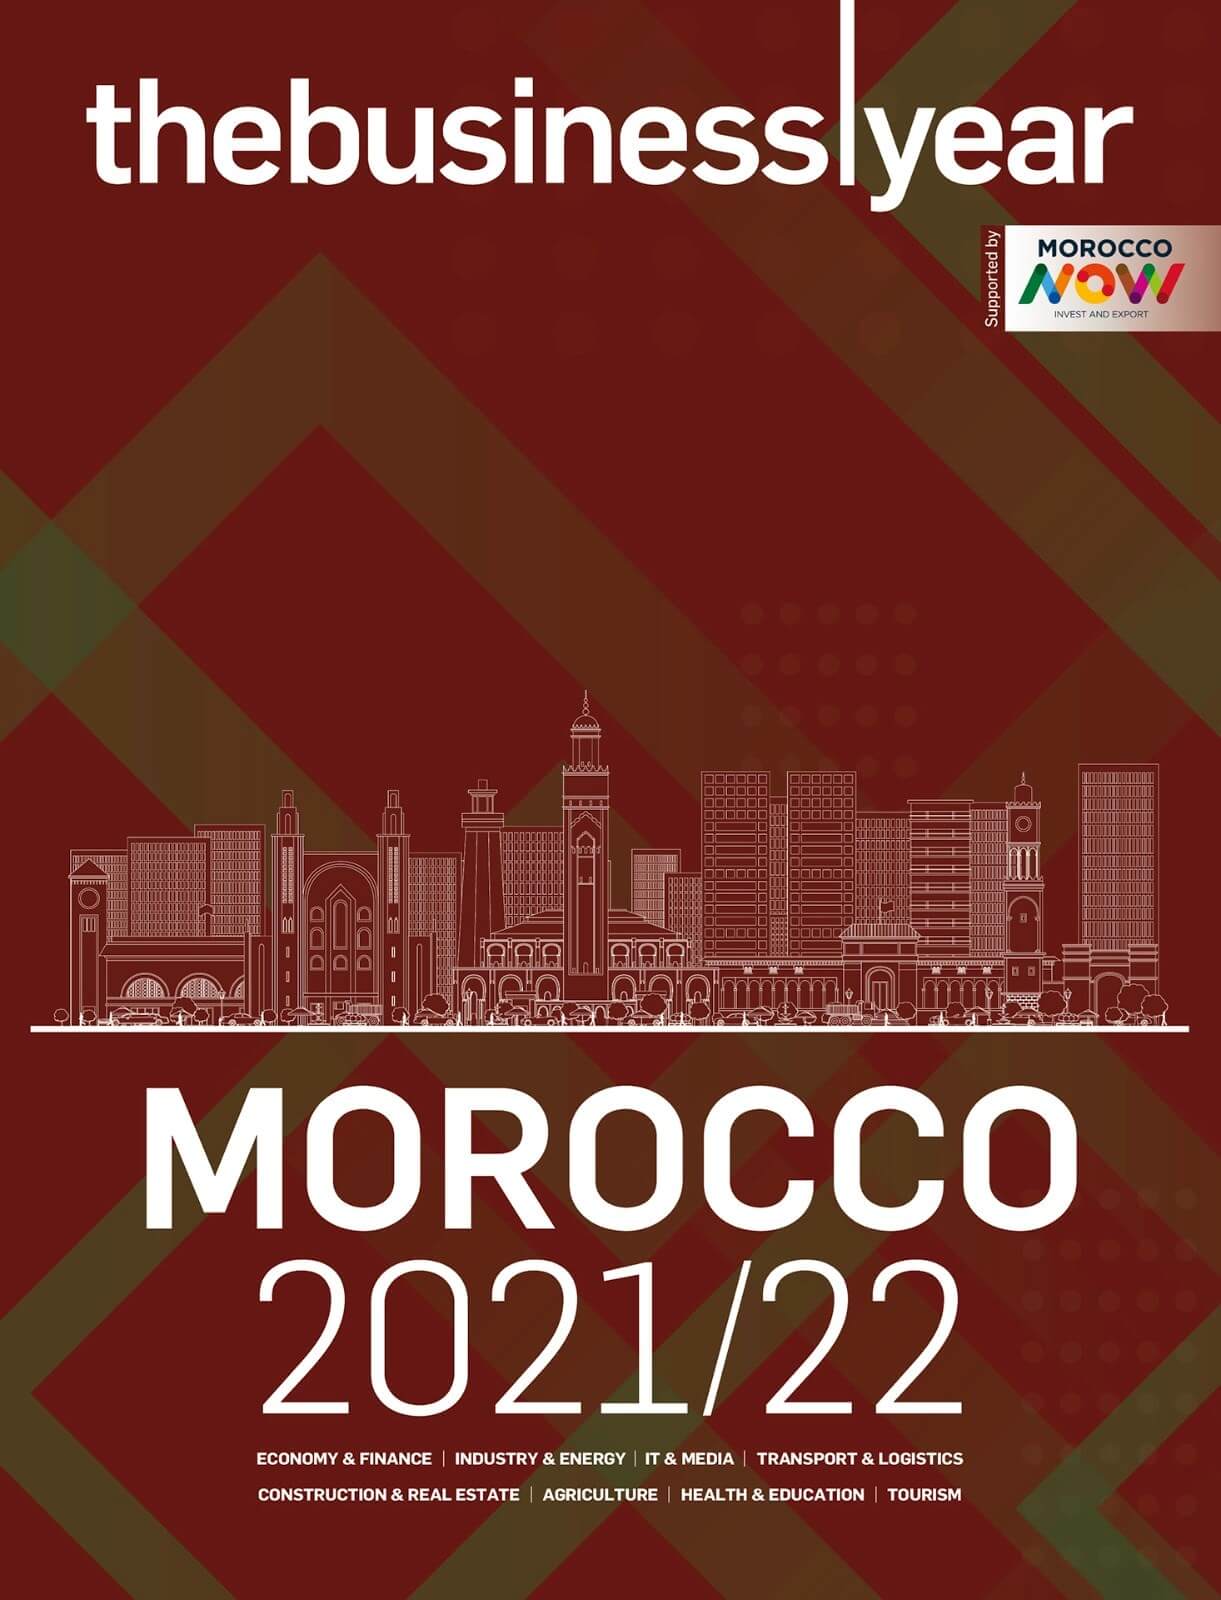 Morocco 2020 Edition - The Business Year